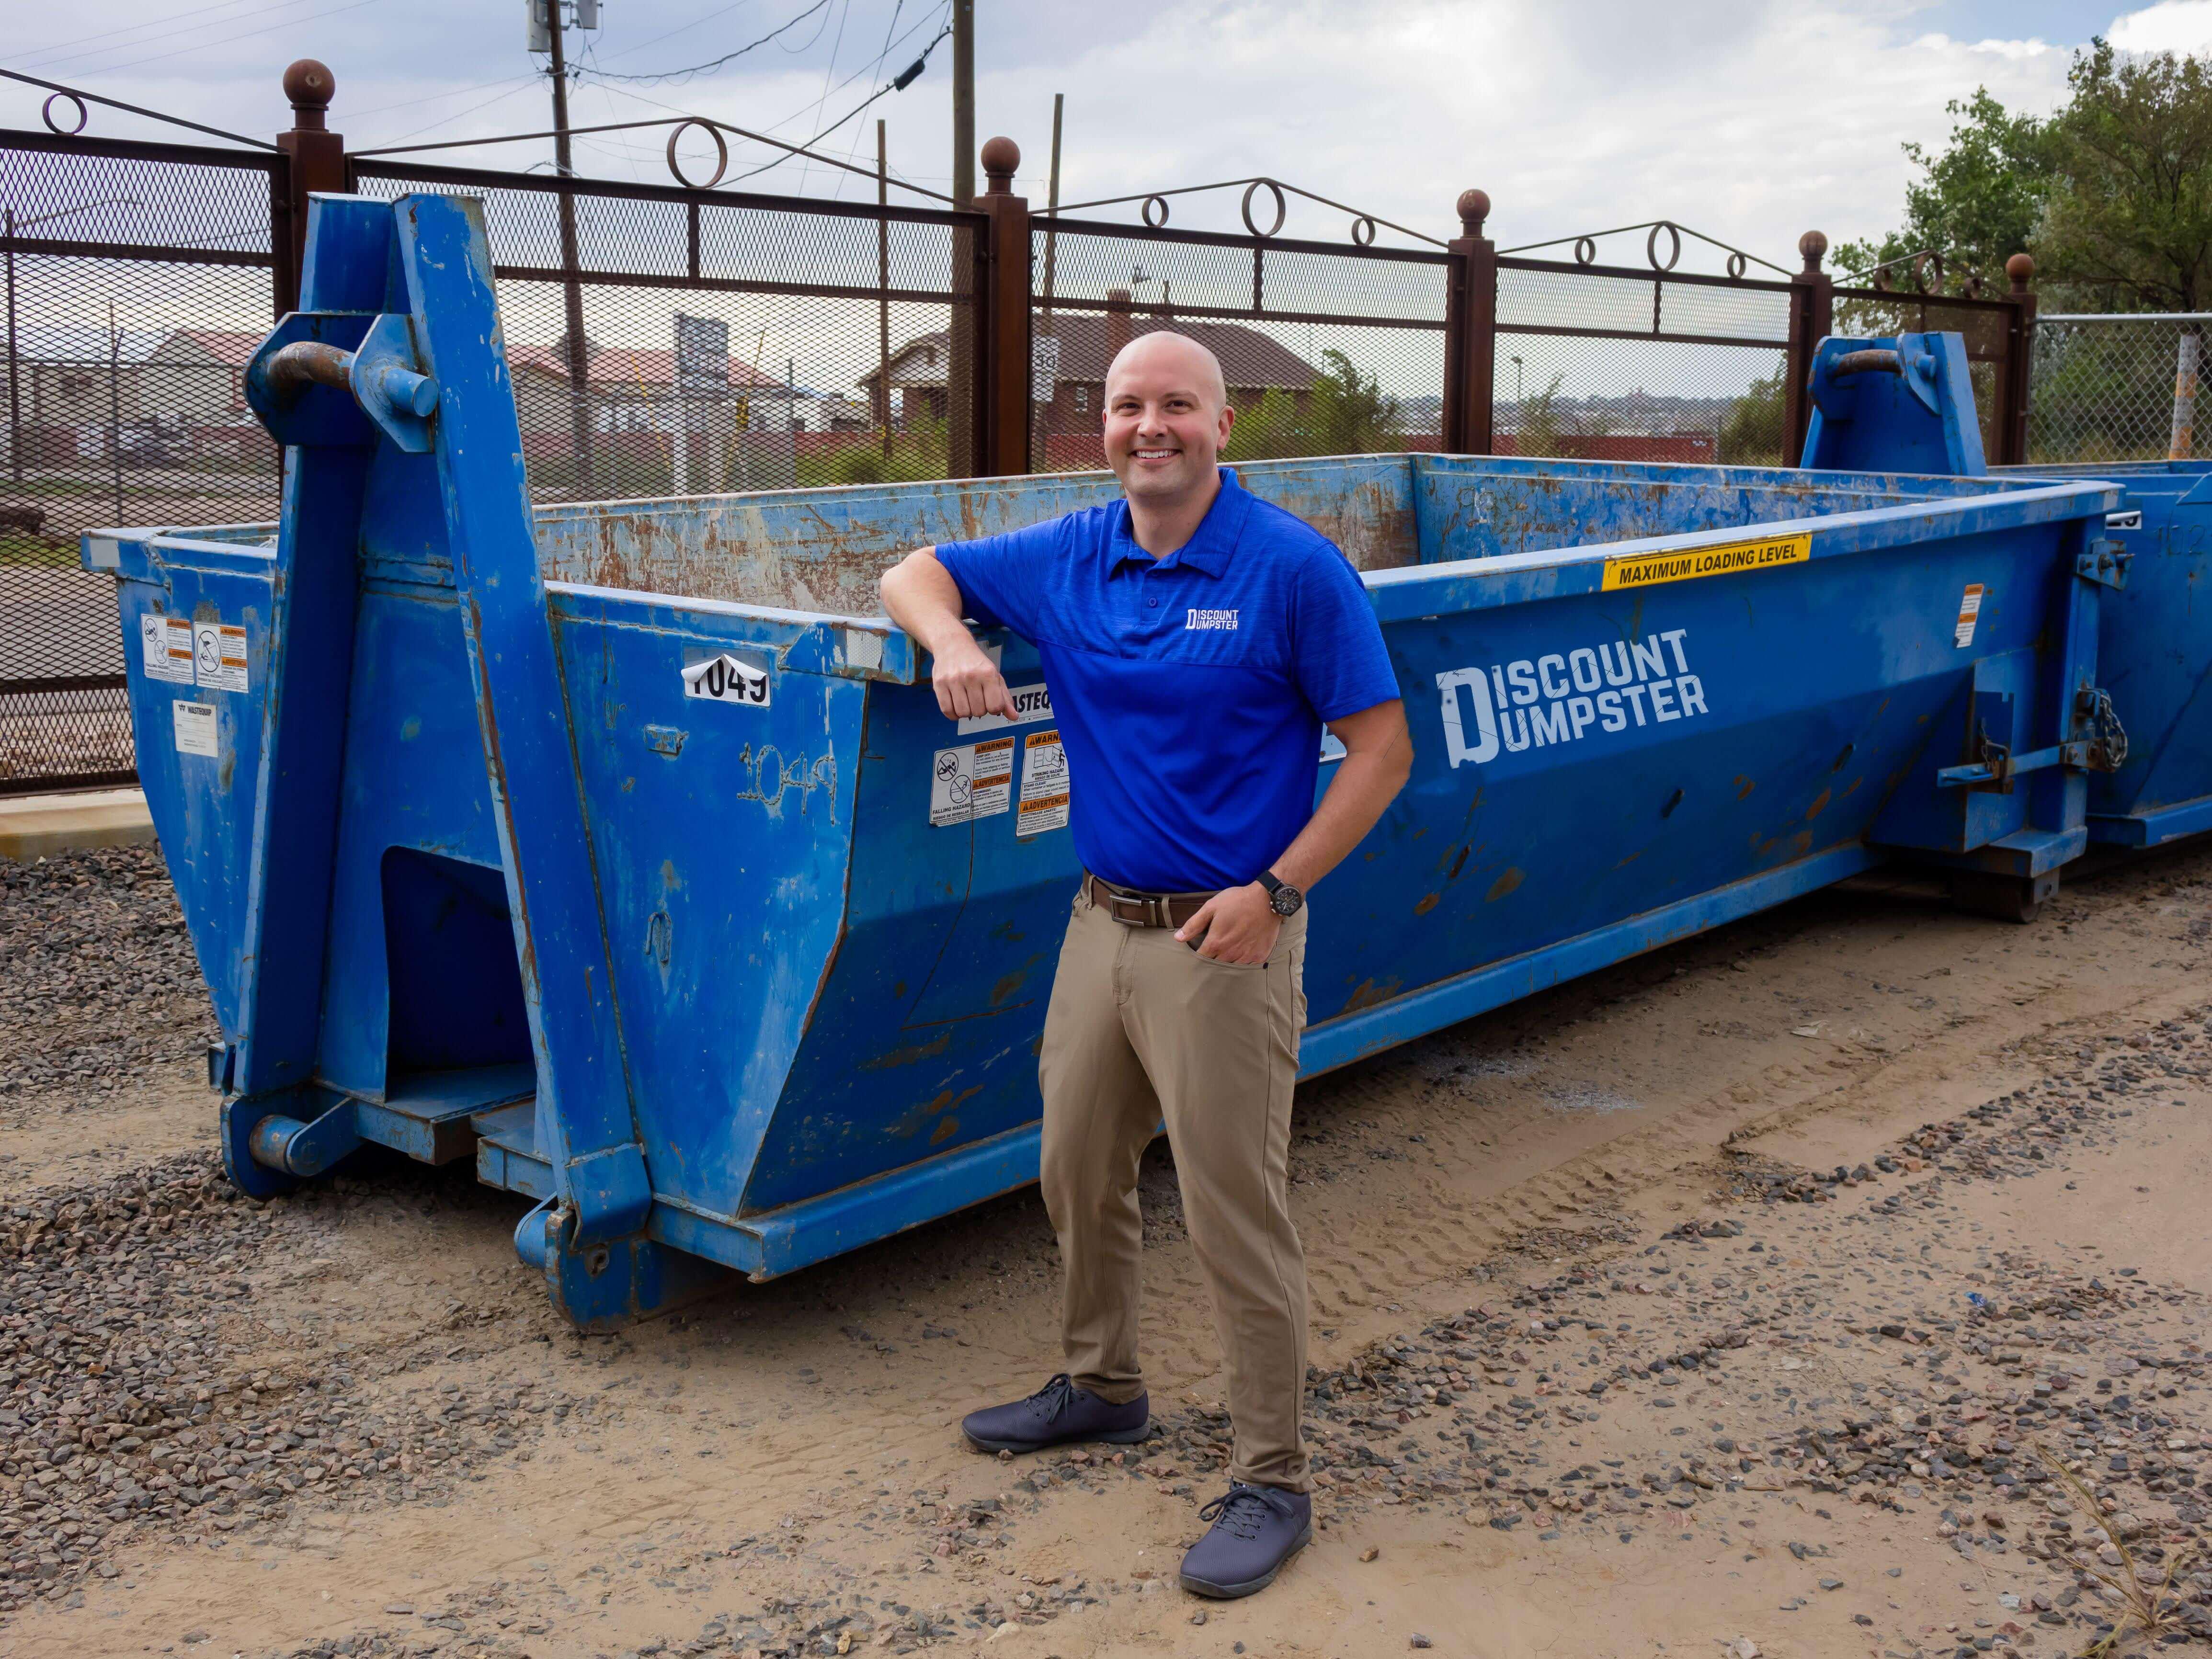 Discount dumpster is a quality dumpster rental service in chicago il Discount Dumpster Chicago (312)549-9198